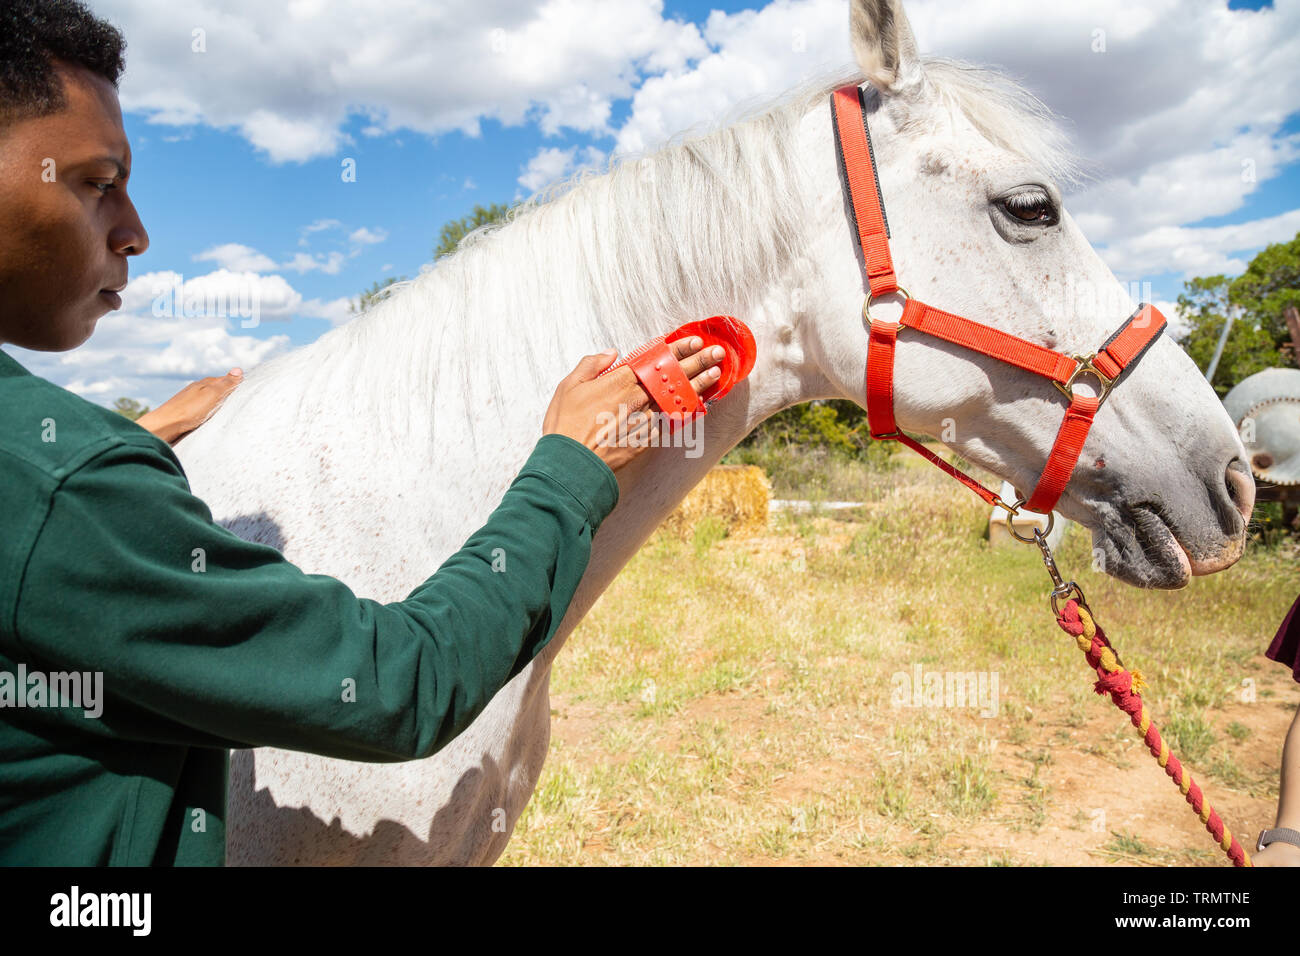 Back view of young African American male using brush to care for hair of white horse on cloudy day ranch Stock Photo